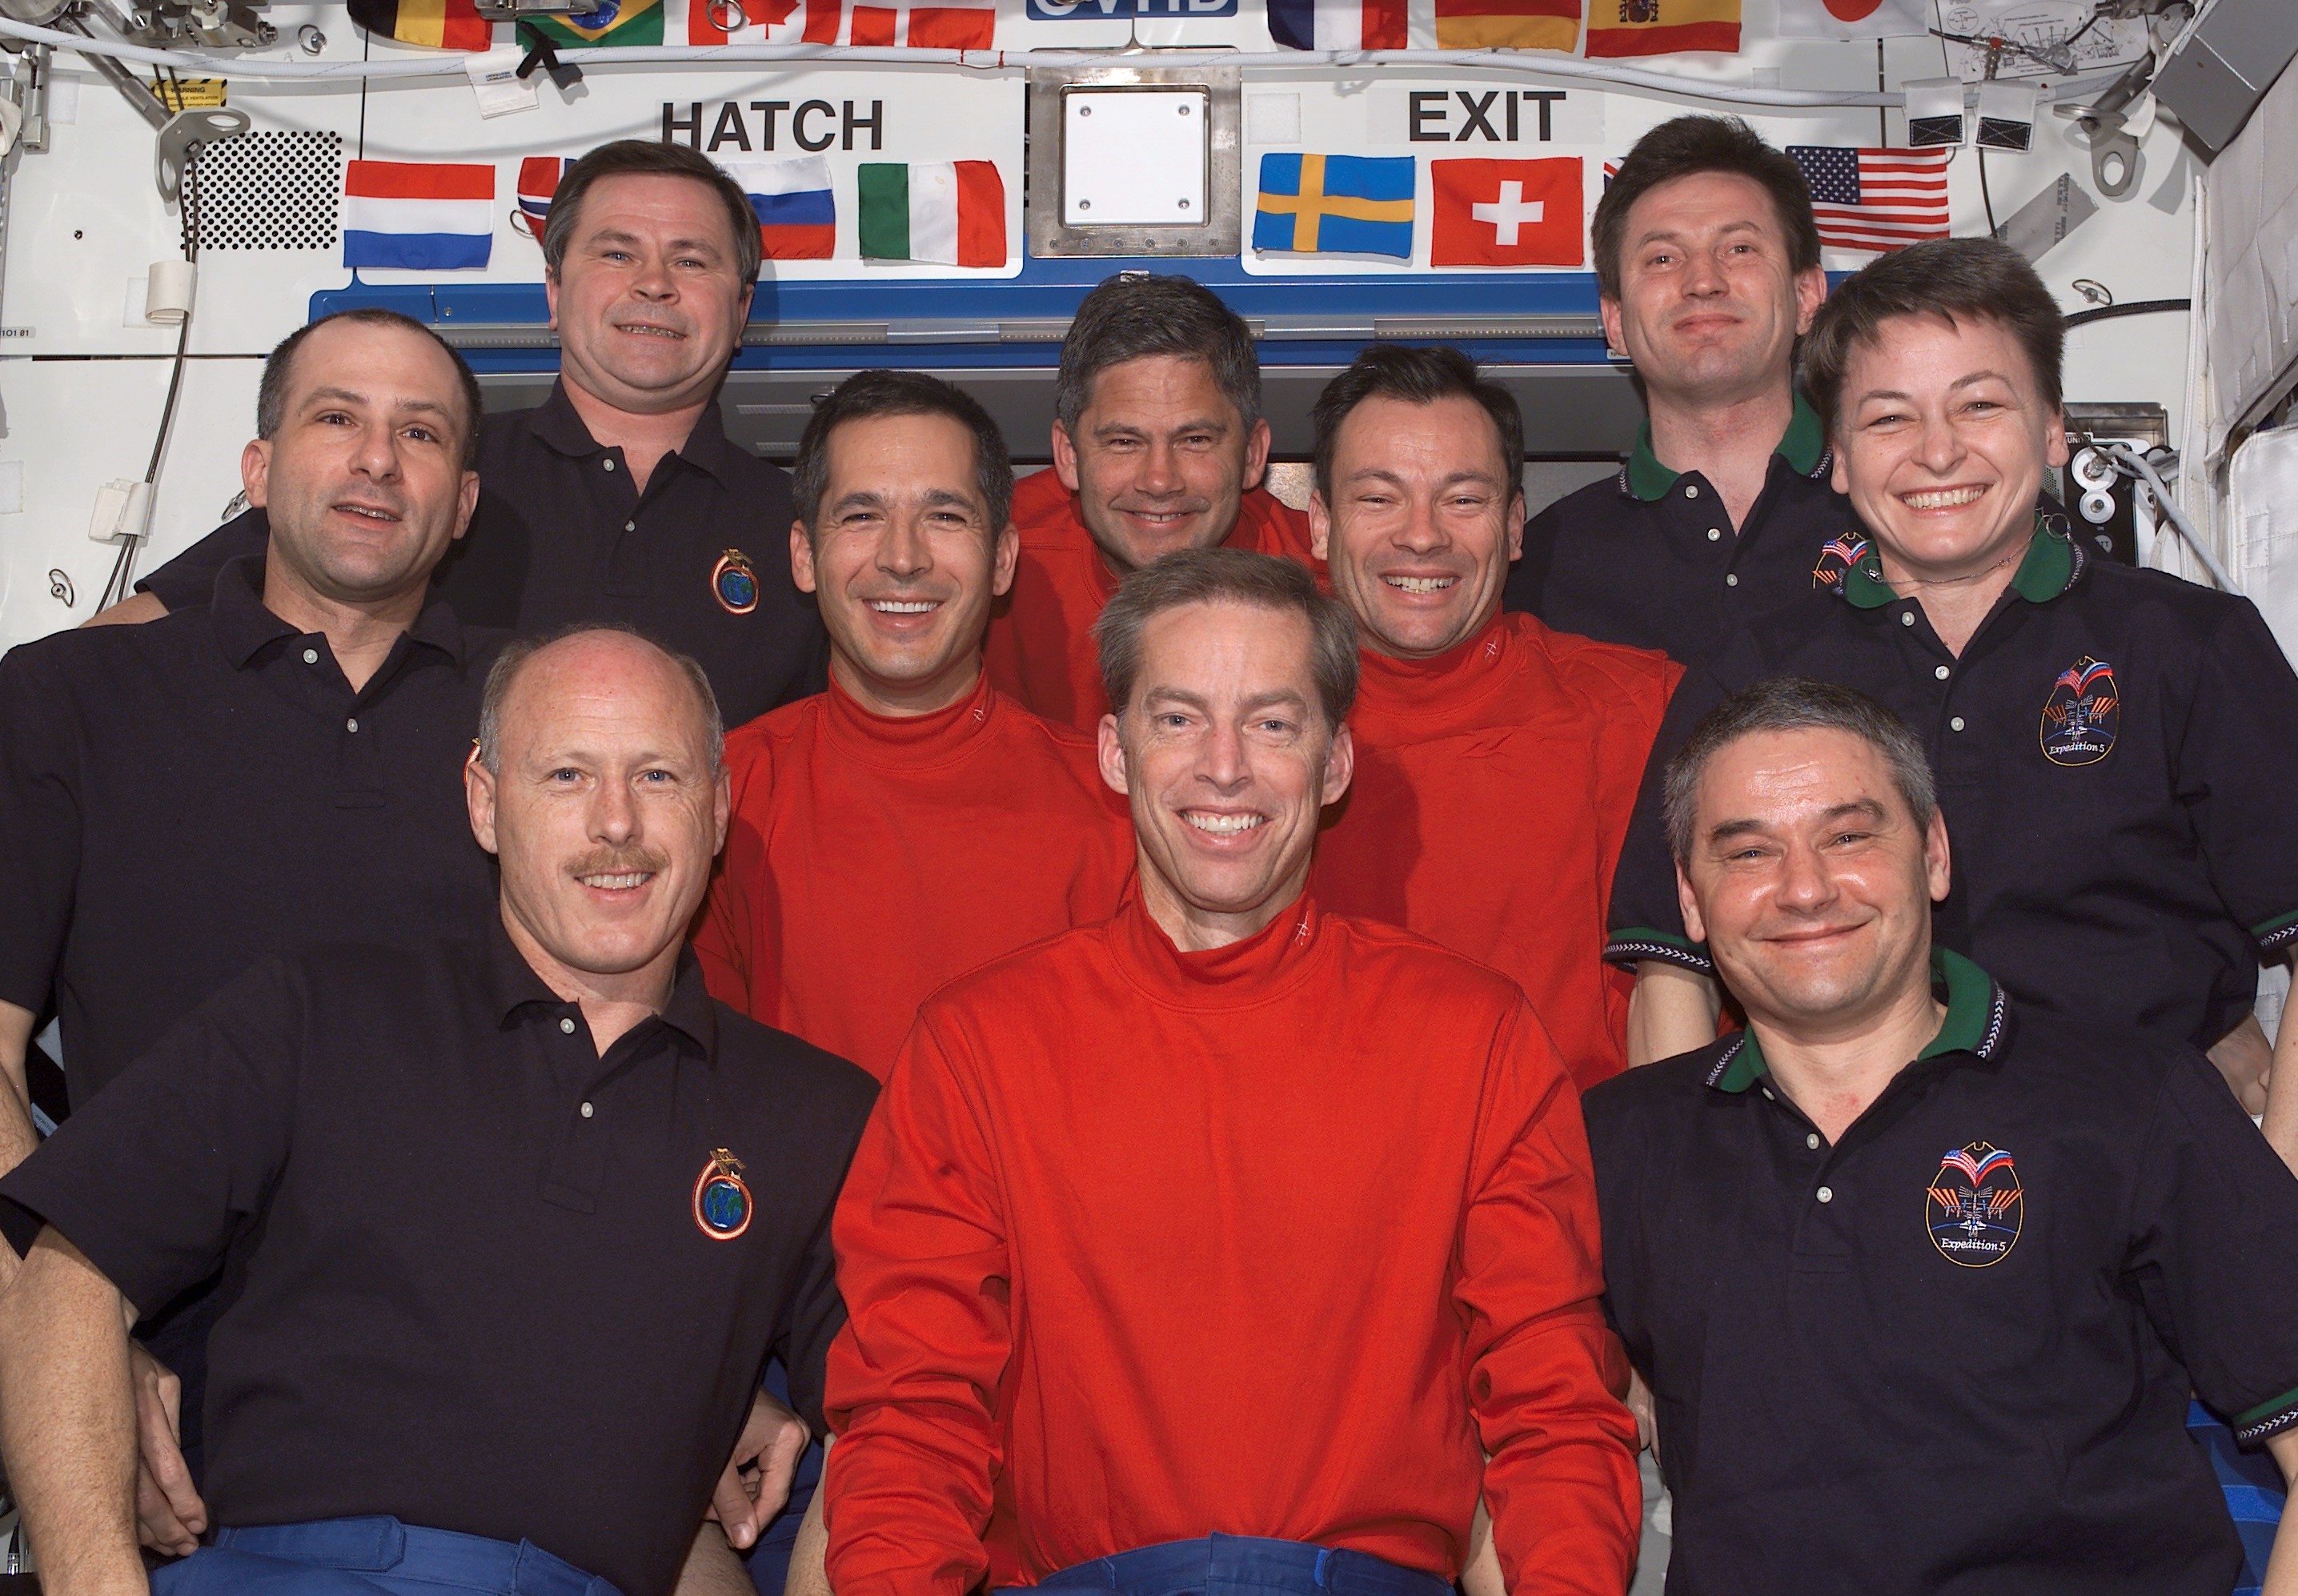 Lopez-Alegria, second from right in the middle row, posing in the Destiny module with his STS-113 crewmates, as well as the Expedition 5 and 6 crews